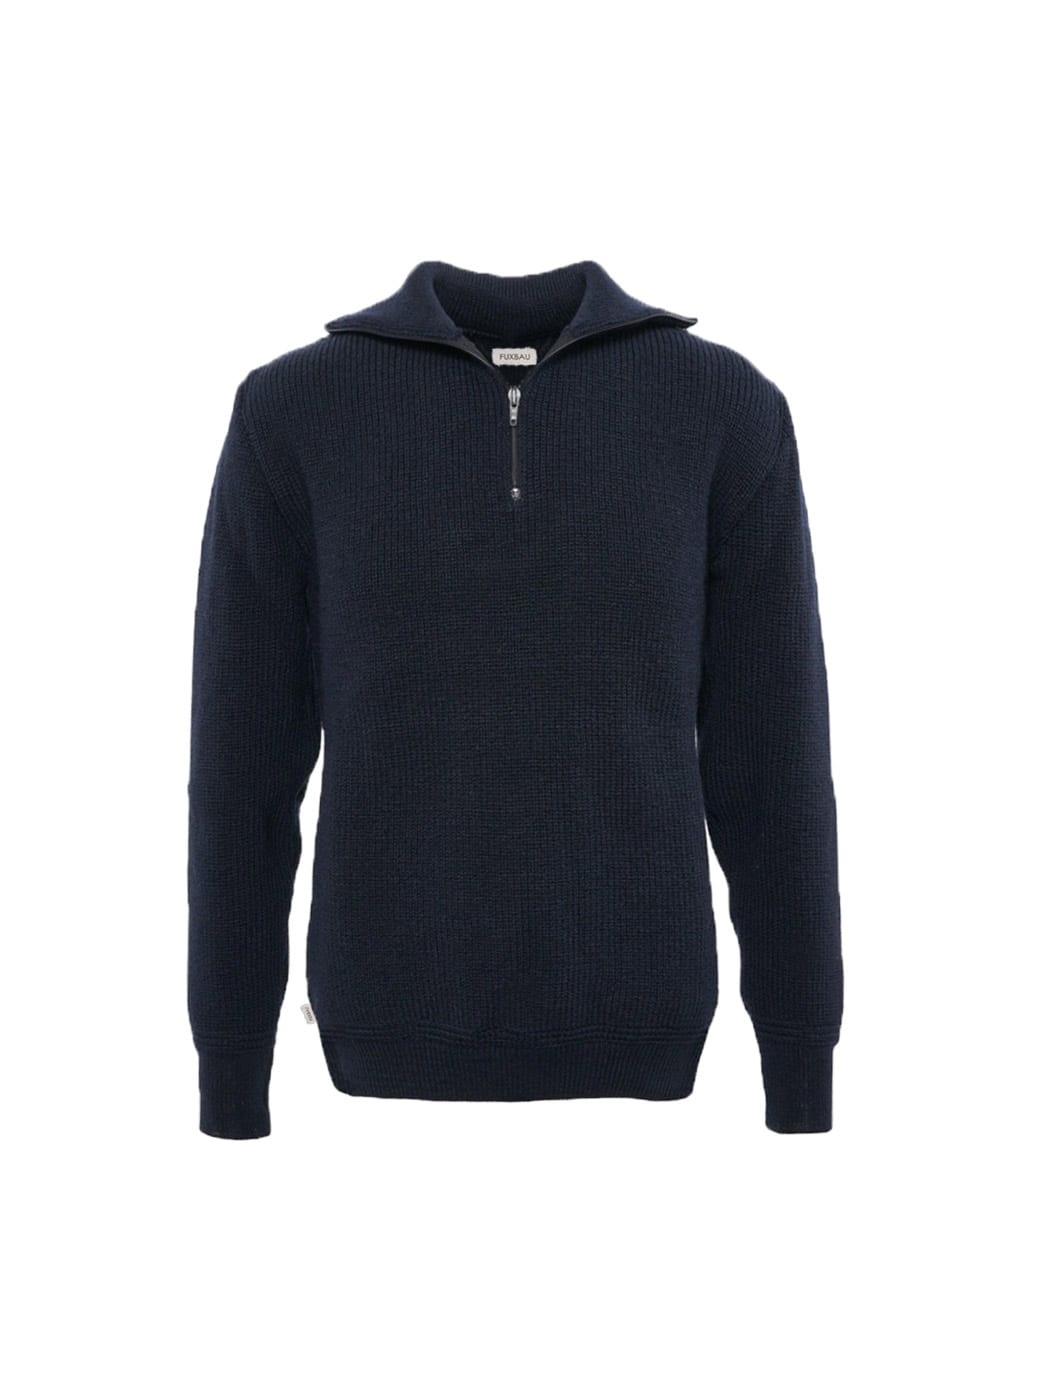 fuxbau-fair-fashion-troyer-made-in-germany-schurwolle-merino-navy-front